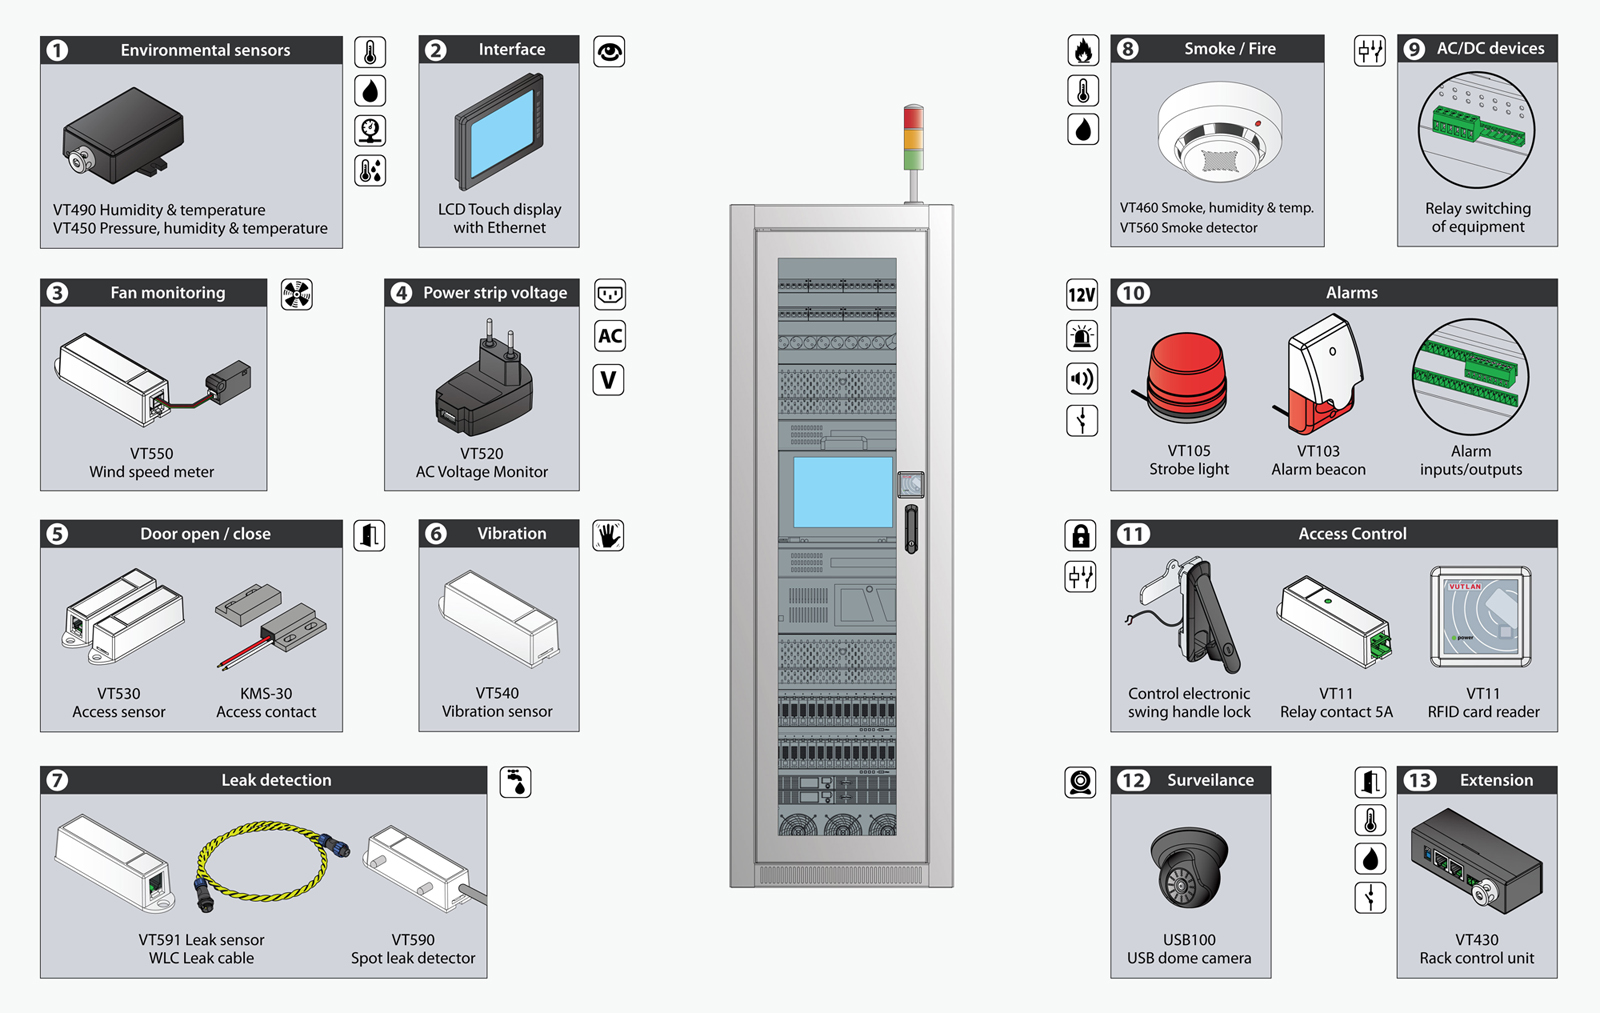 Server Room Temperature Monitoring Systems - CAS Dataloggers